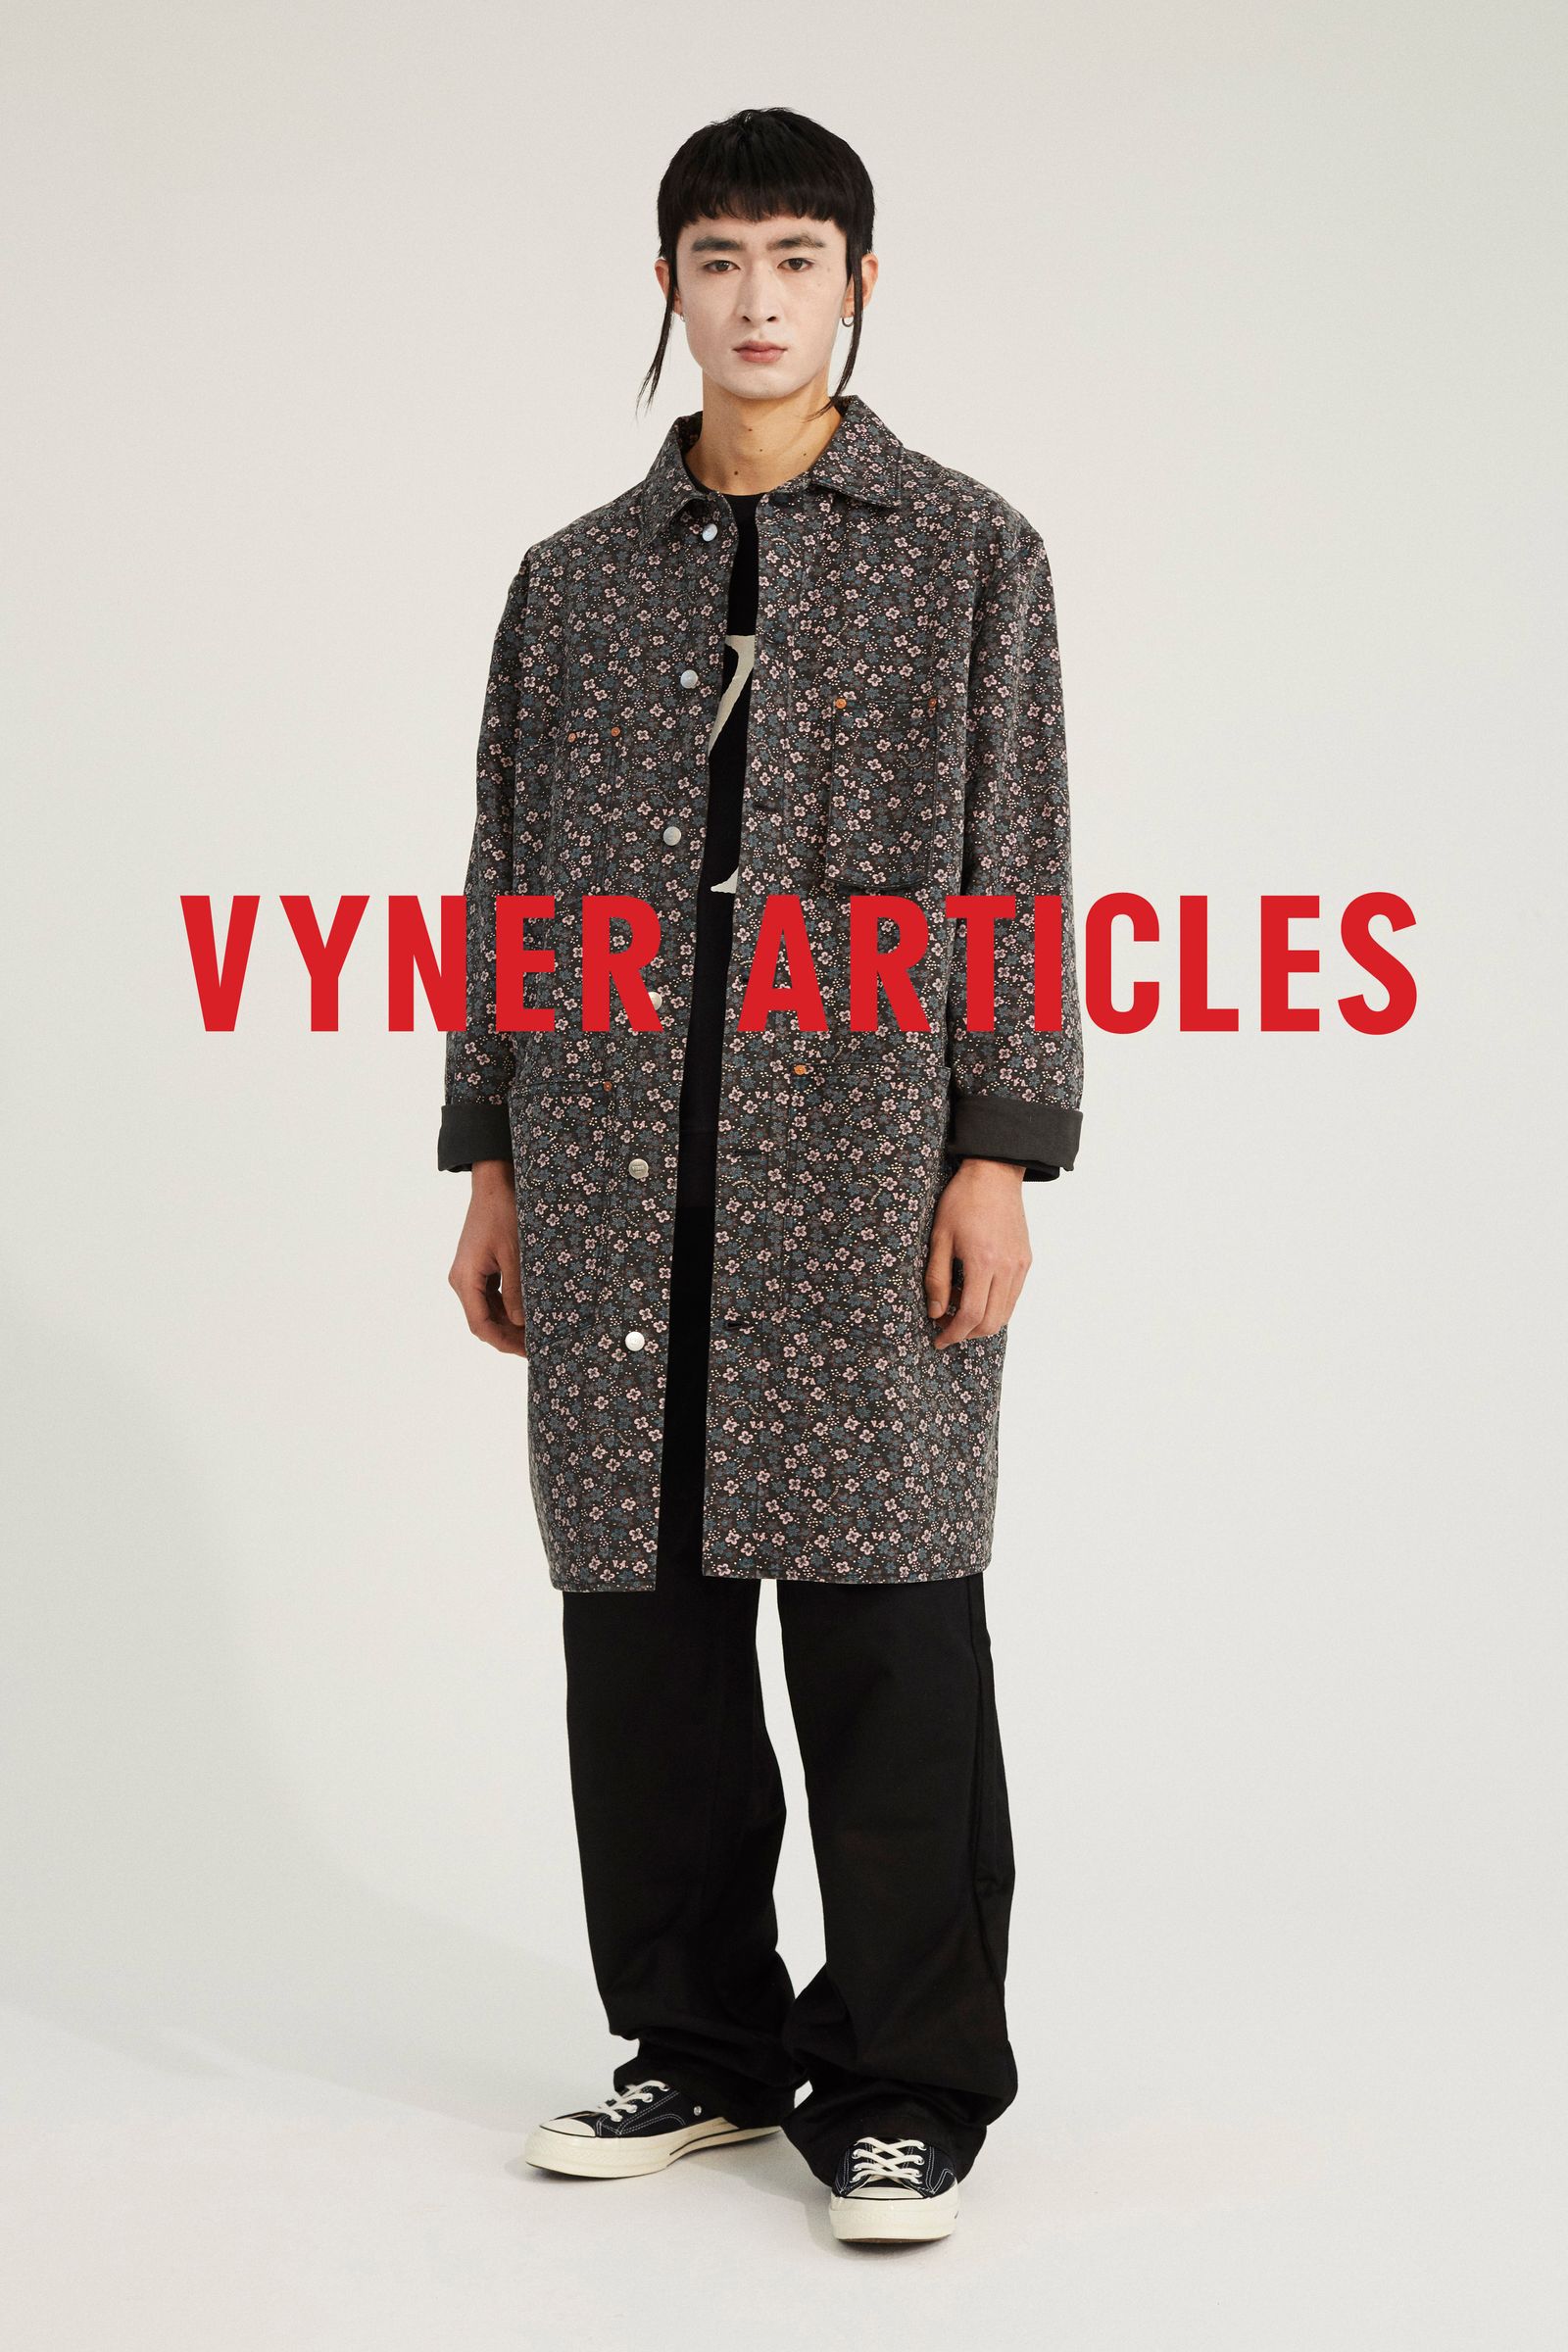 VYNER ARTICLES / 20aw | Confidence